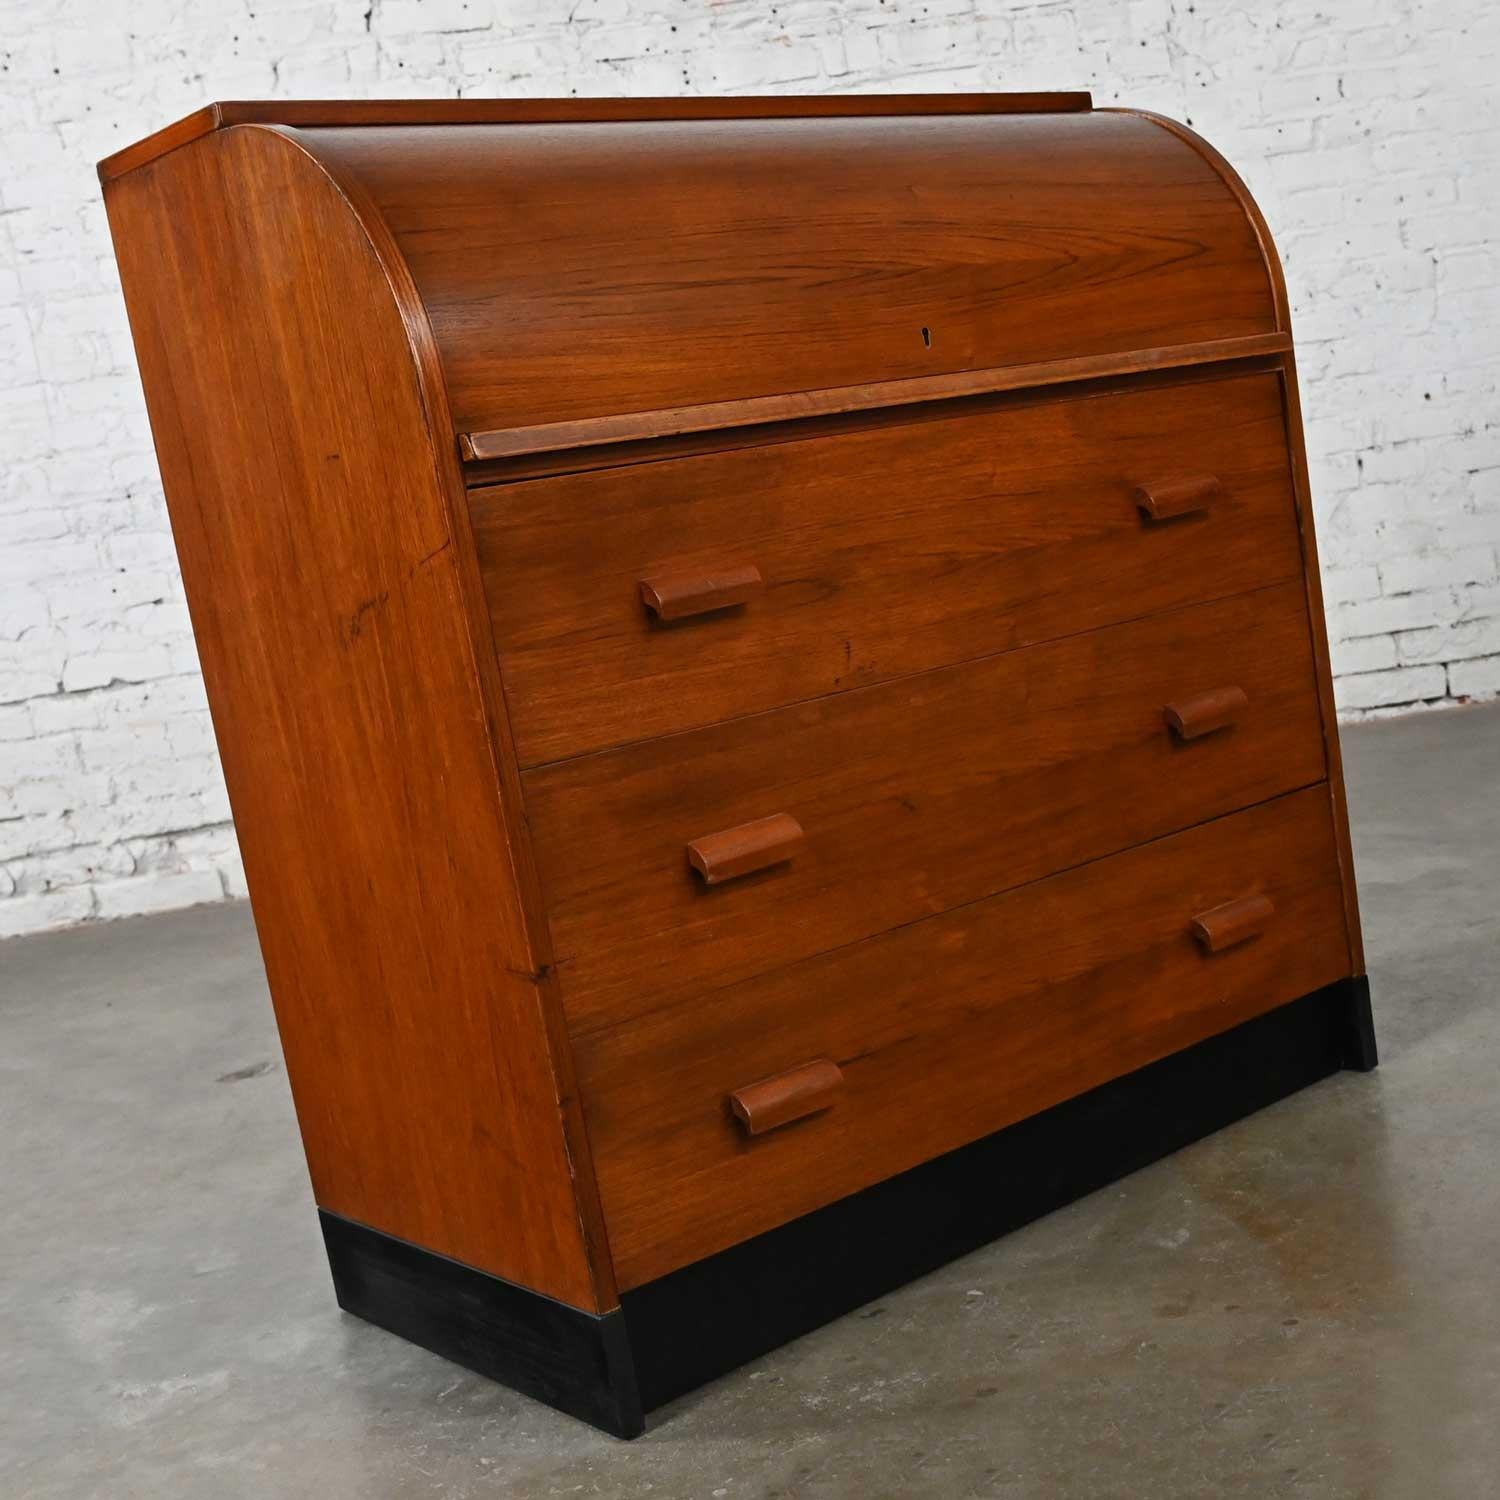 Handsome vintage Scandinavian Modern teak roll top desk or dresser. Beautiful condition, keeping in mind that this is vintage and not new so will have signs of use and wear. It has some visible wear, particularly in the top, so you can see some